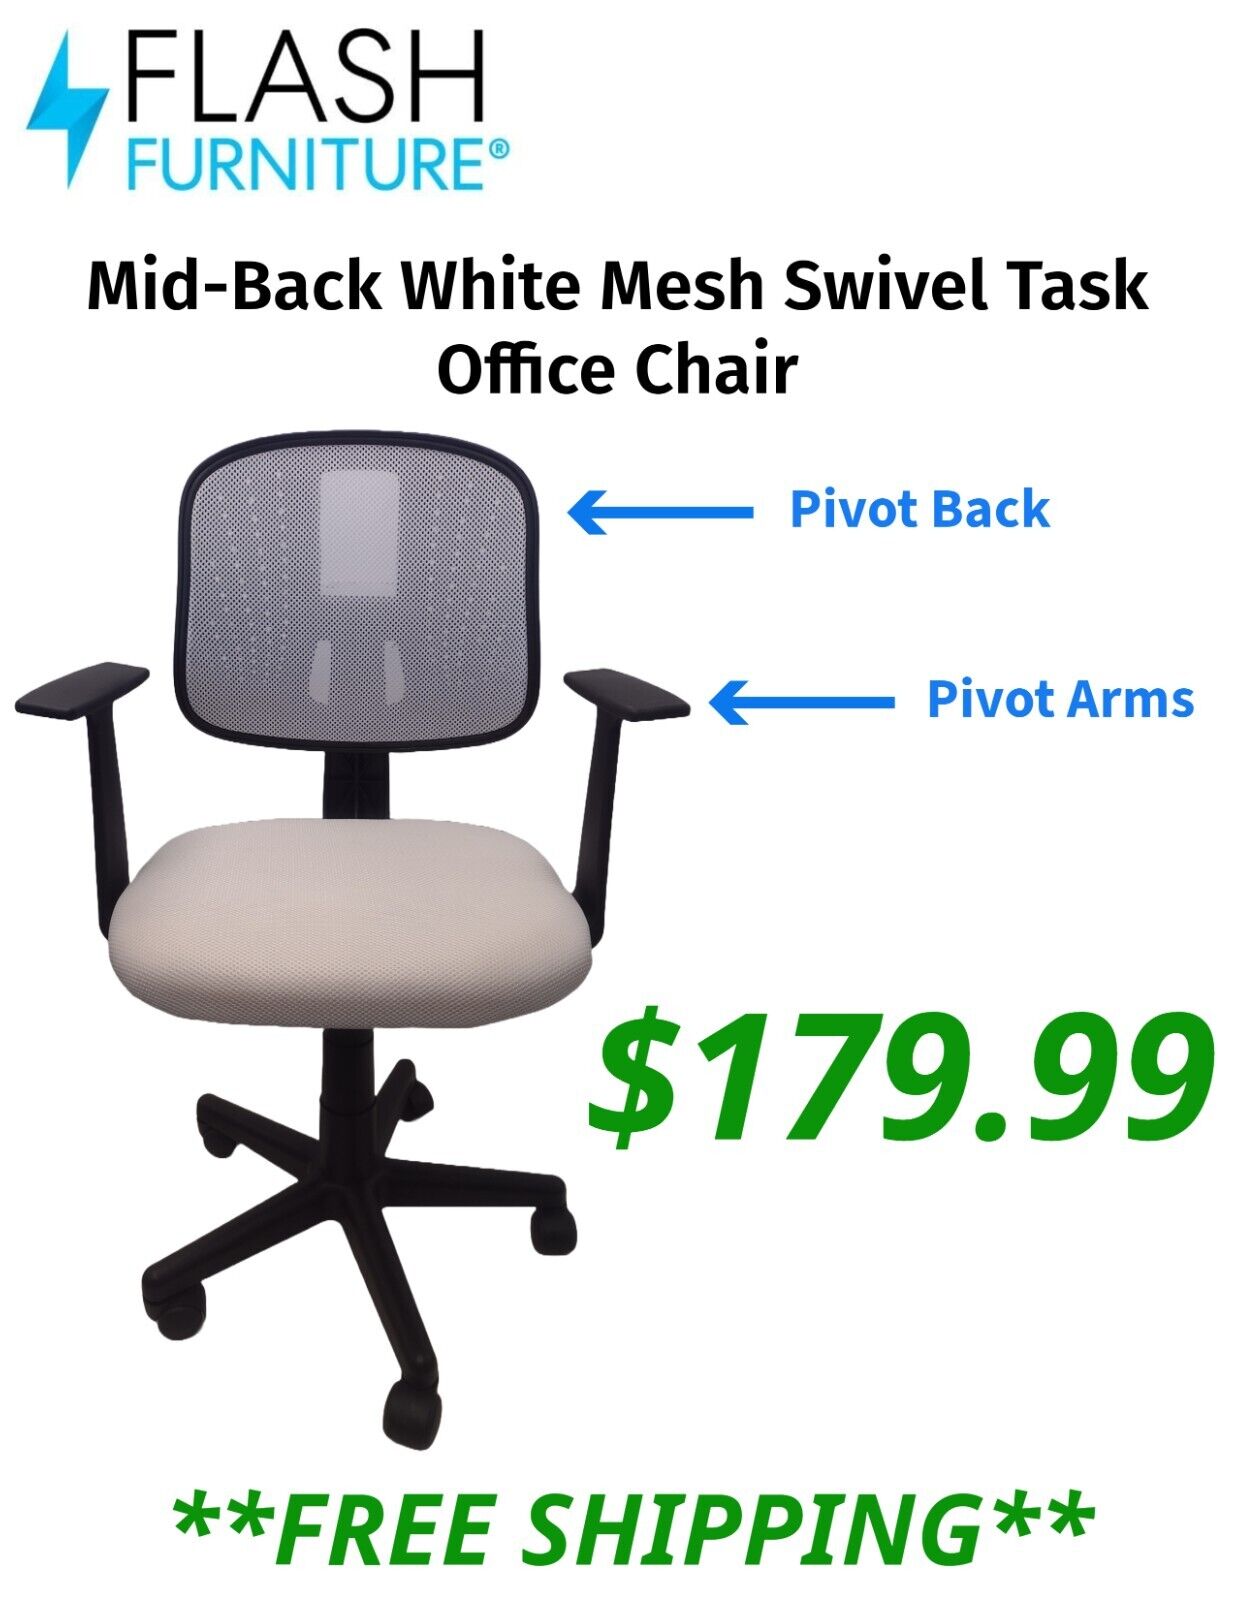 NEW - Flash Furniture Mid-Back White Mesh Swivel Office Chair - *FREE SHIPPING*